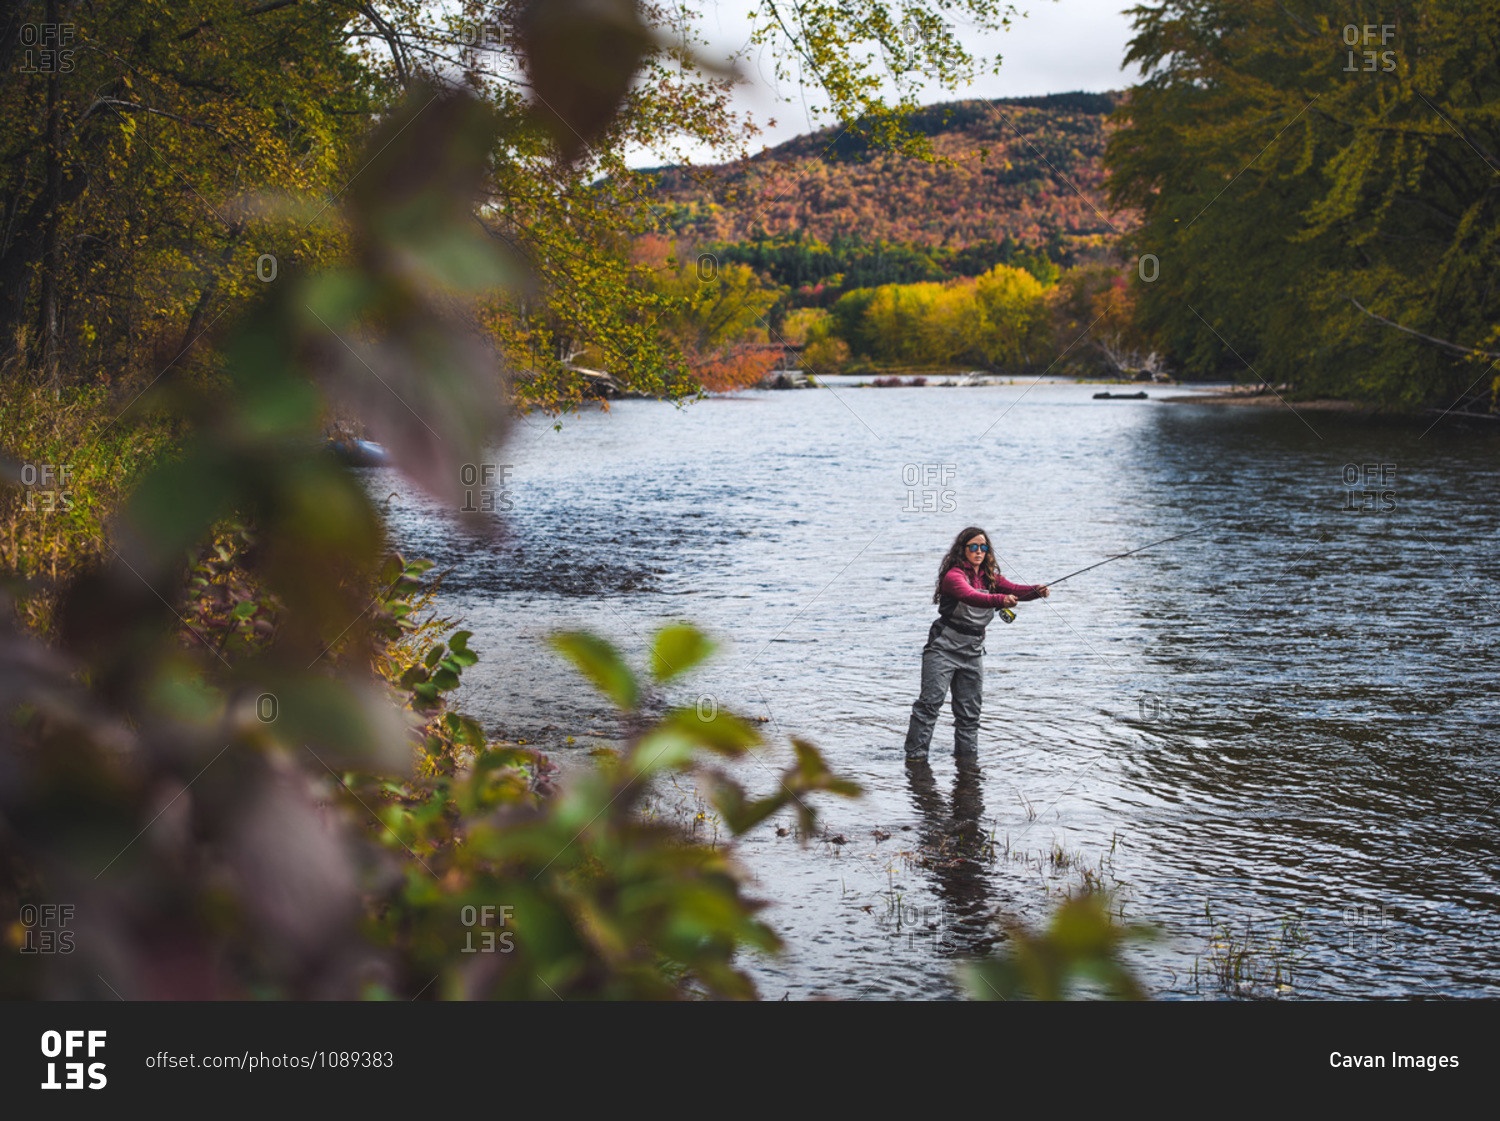 Woman in waders casts upstream during fall foliage season in NH